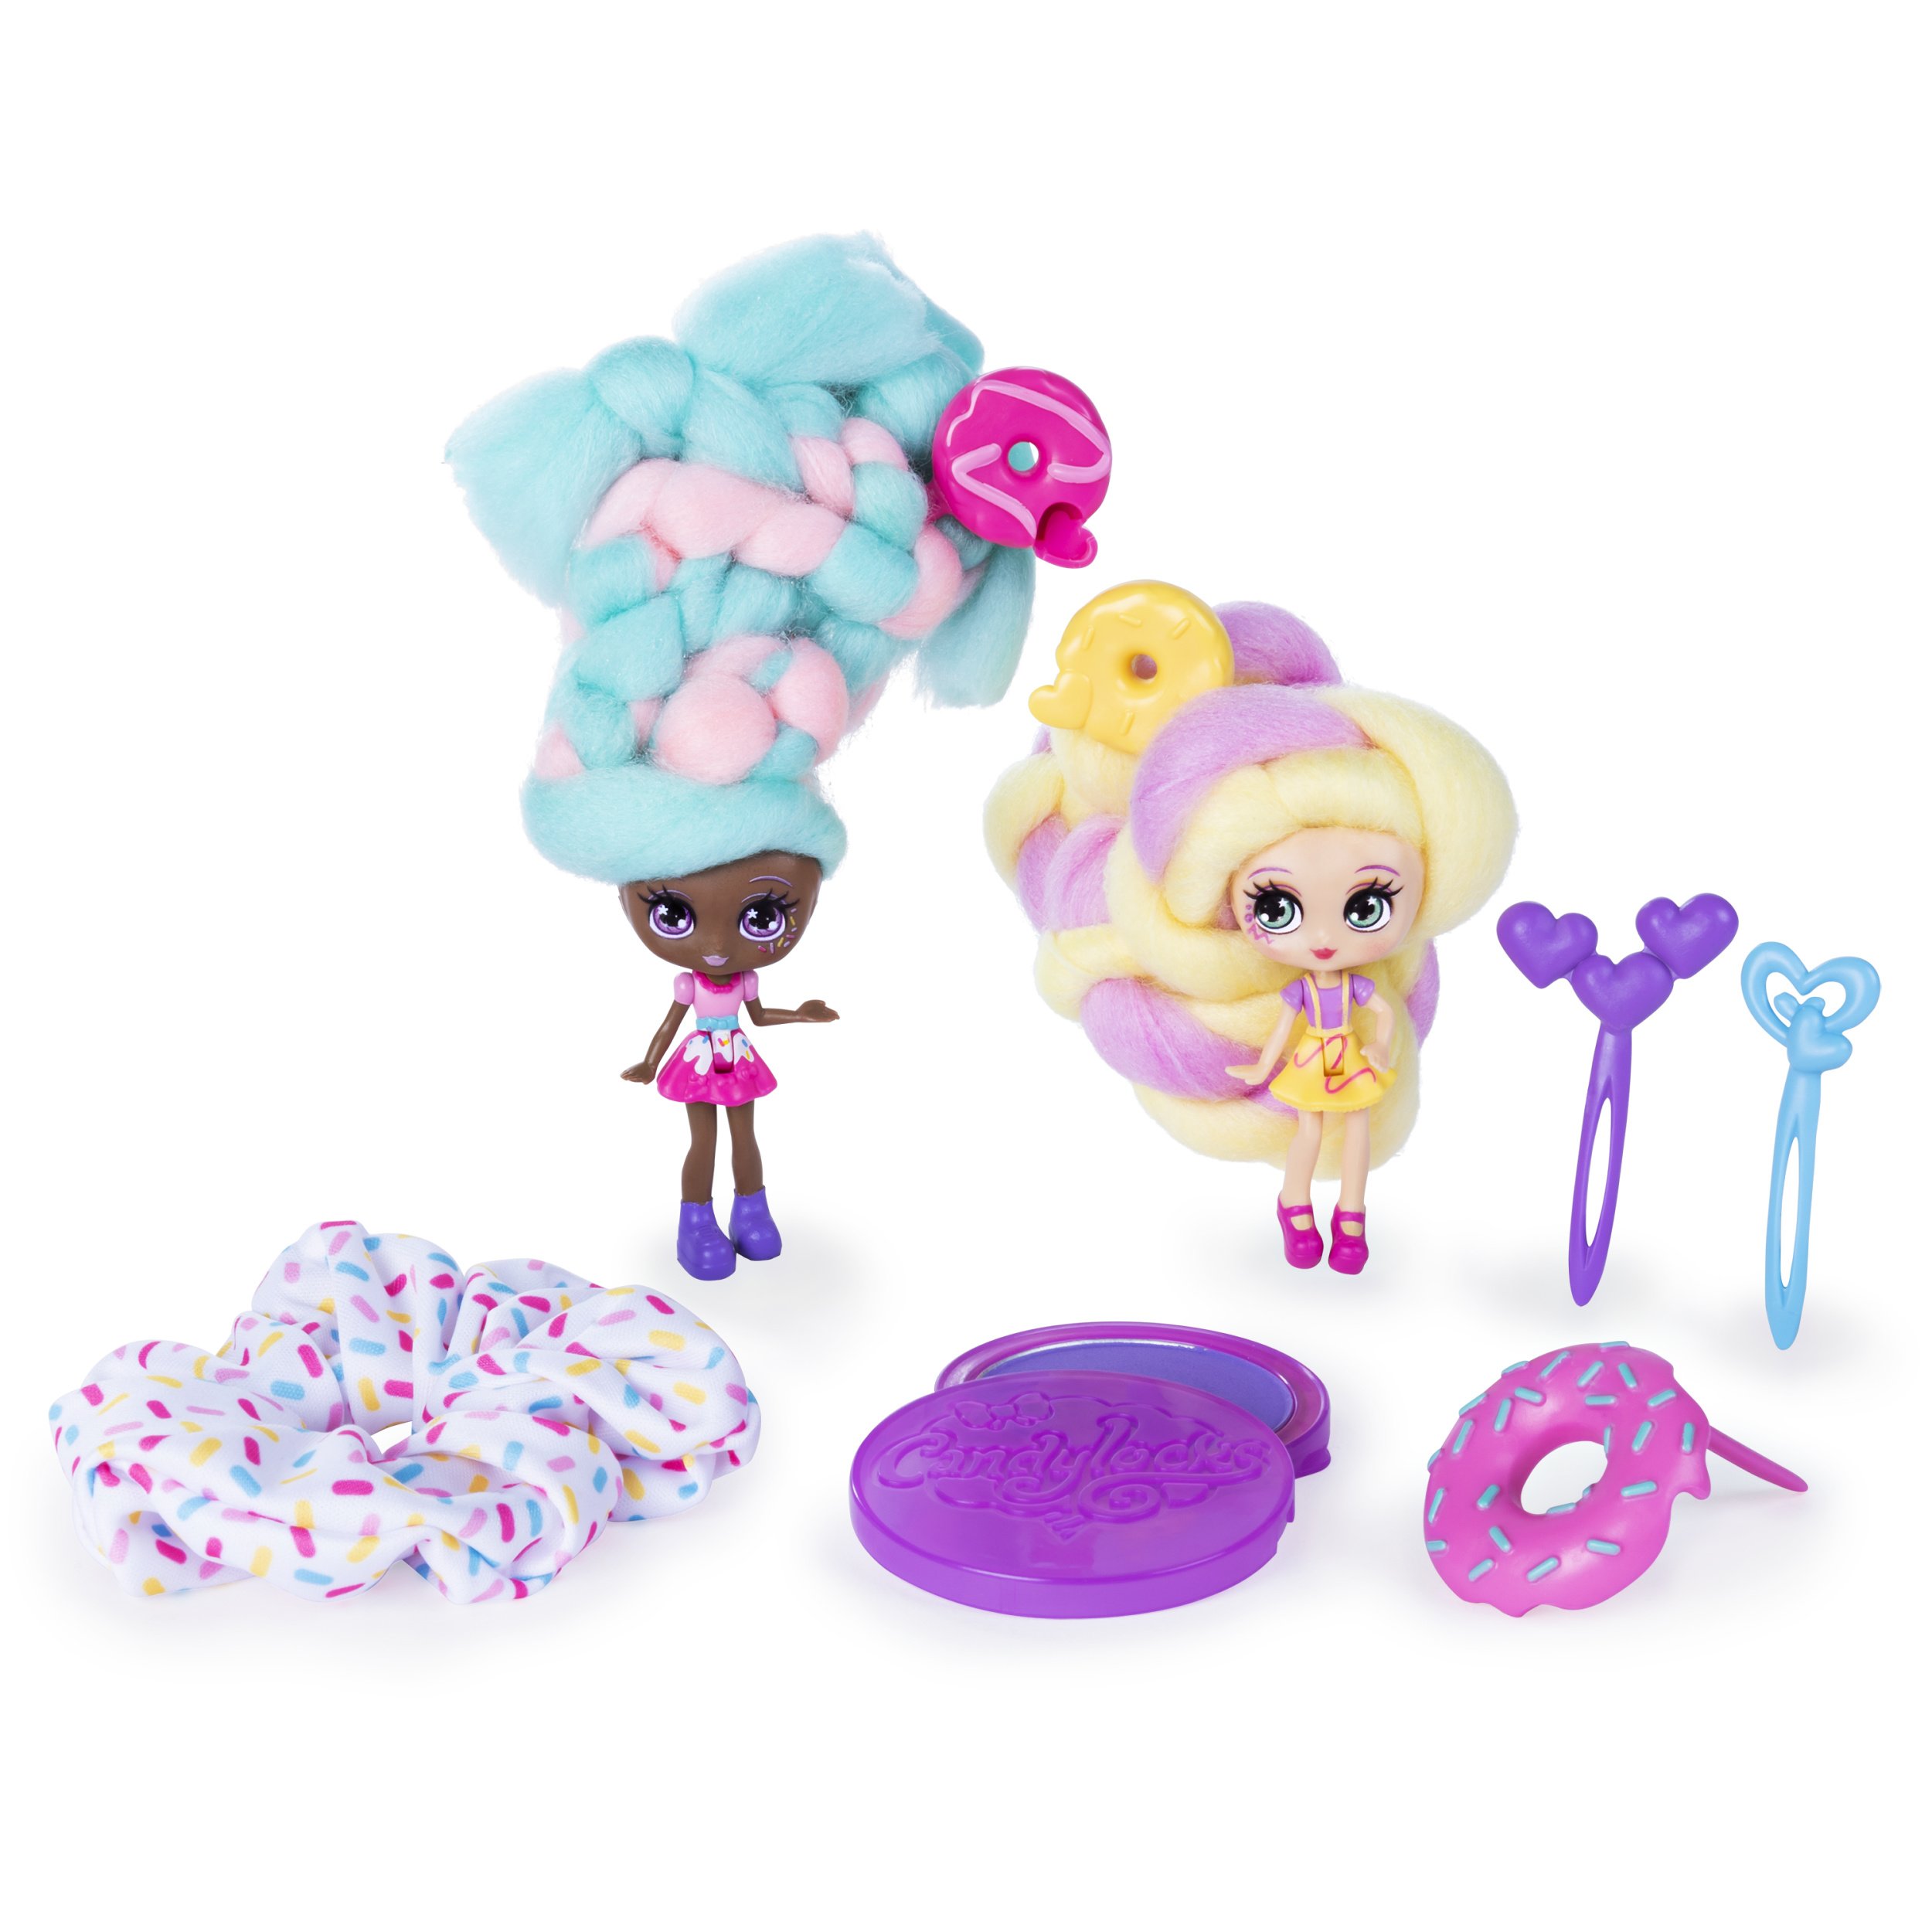 Candylocks, Bff 2-Pack, Jilly Jelly and Donna Nut, Scented Collectible Dolls with Accessories - image 1 of 6